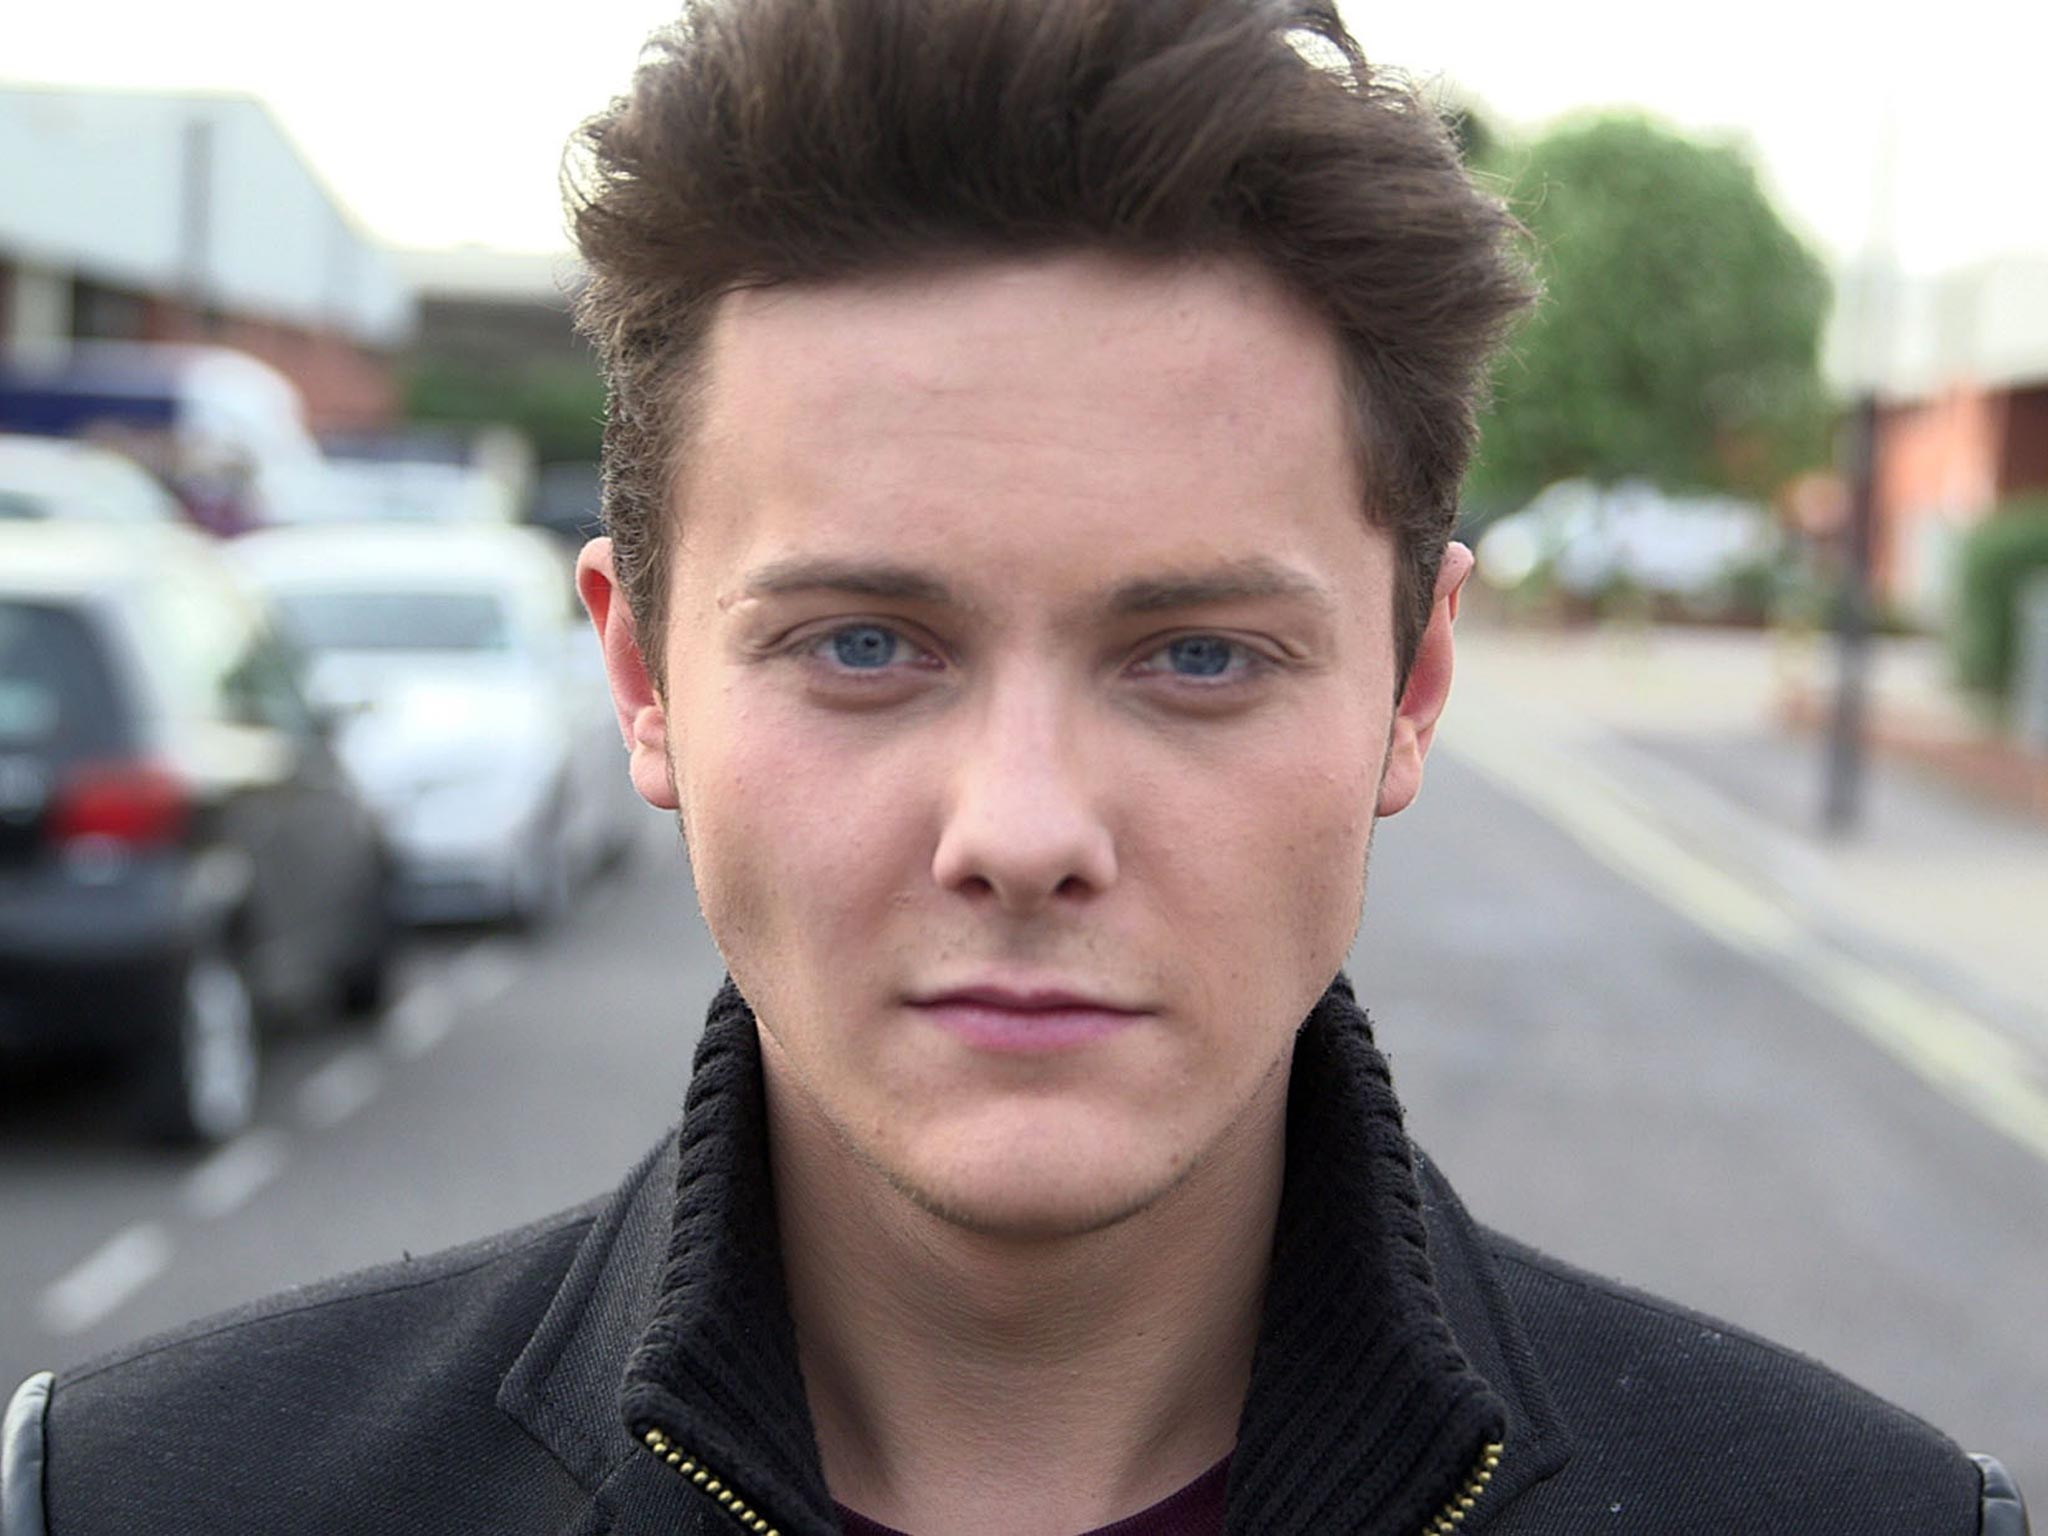 New Porn Stars 2014 18 - Tyger Drew-Honey Takes on Porn, BBC3, TV review: Outnumbered ...